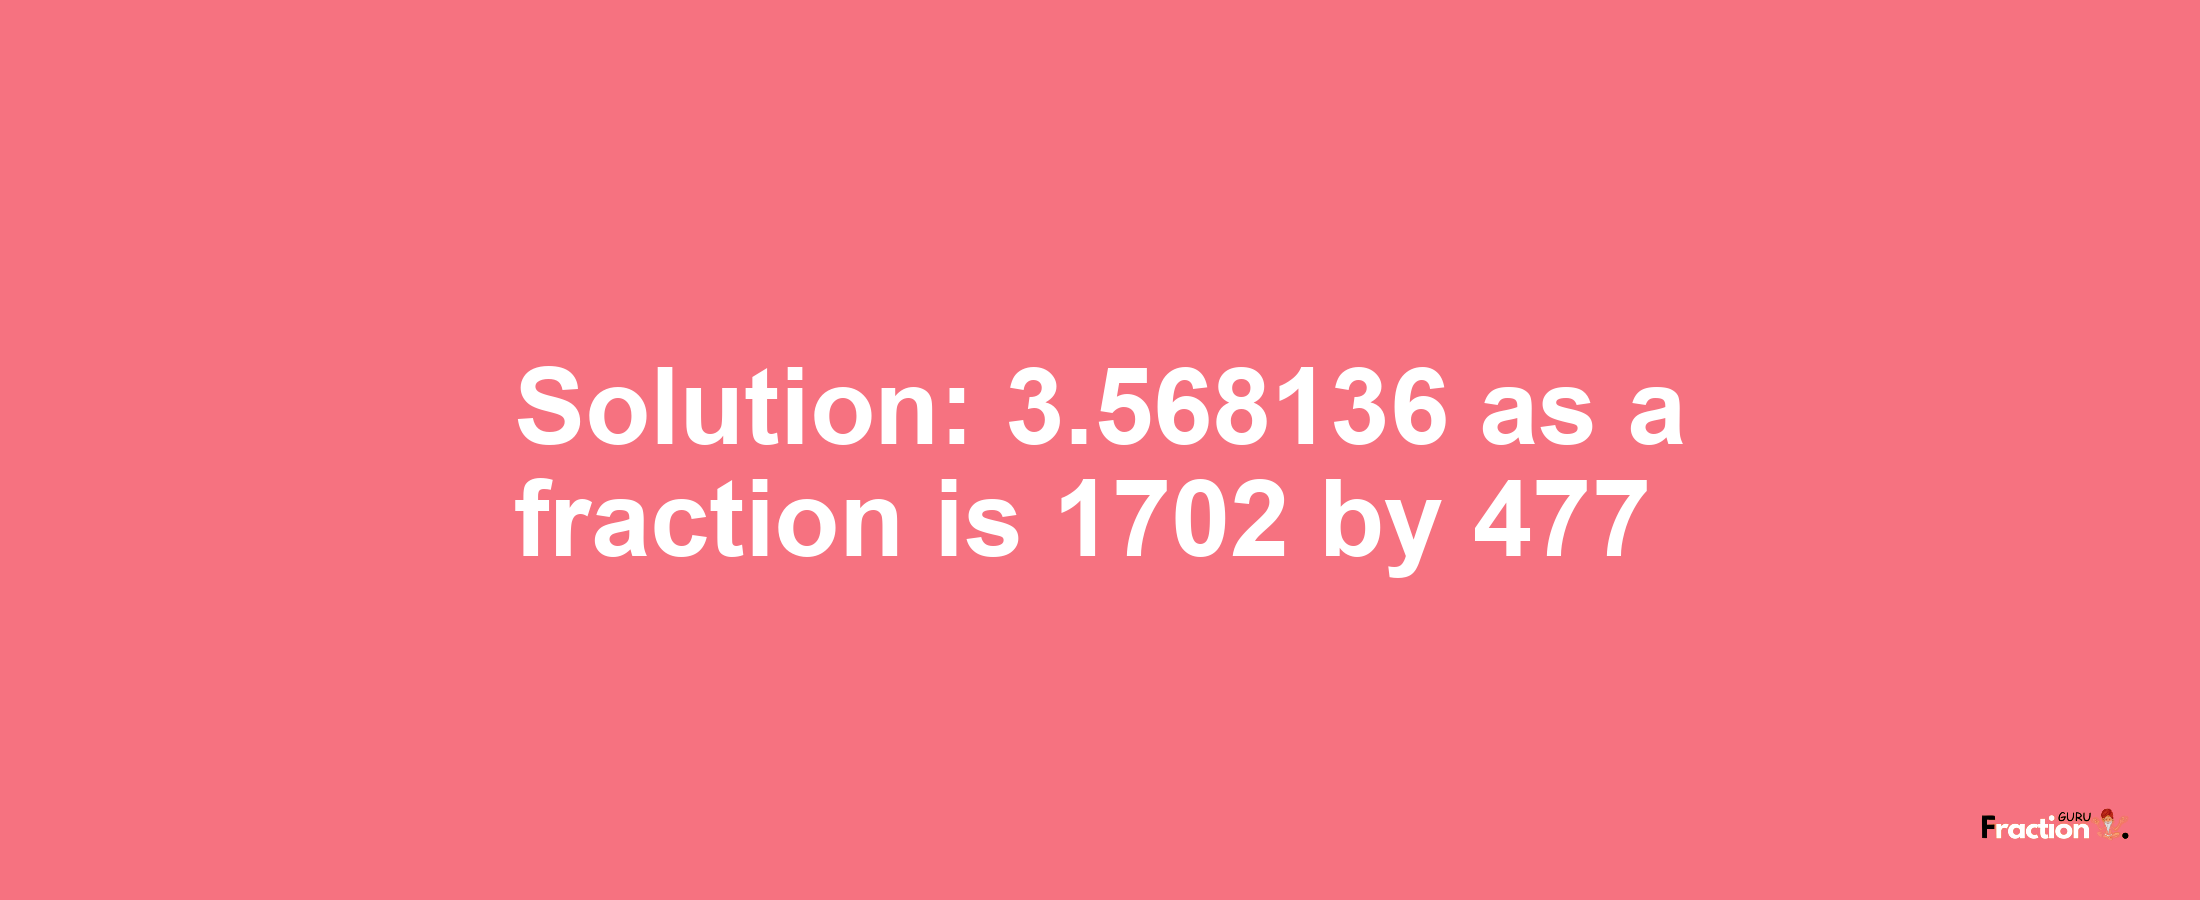 Solution:3.568136 as a fraction is 1702/477